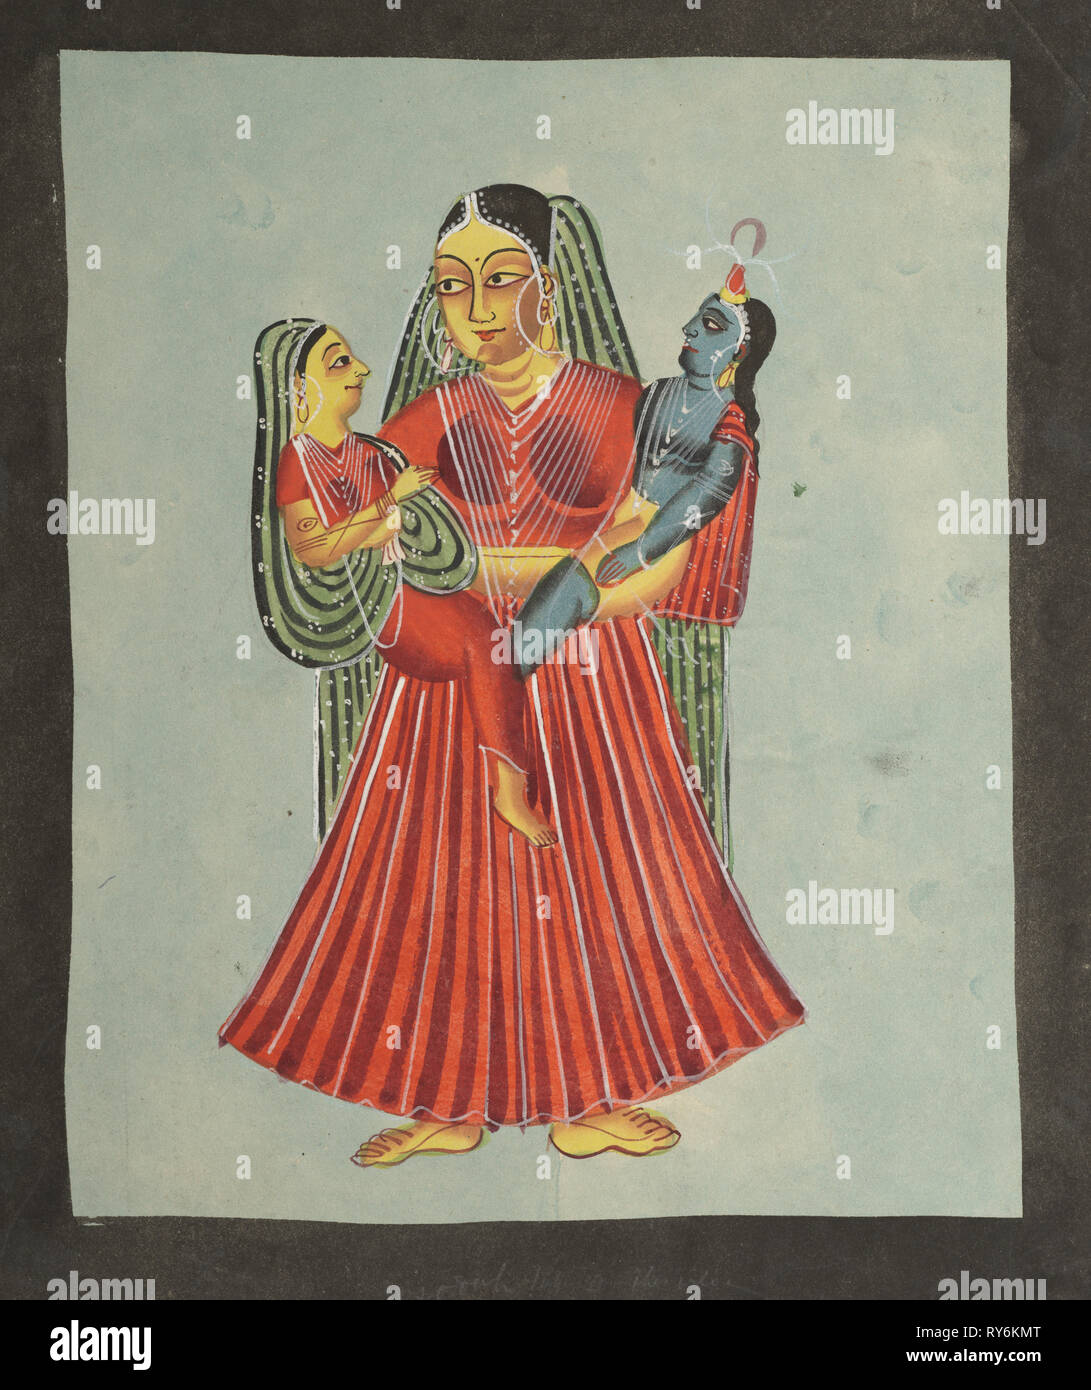 Yasoda Holding Krishna and Radha, 1800s. India, Calcutta, Kalighat painting, 19th century. Black ink, color and silver paint, and graphite underdrawing on paper; secondary support: 36 x 29.1 cm (14 3/16 x 11 7/16 in.); painting only: 30.1 x 25.2 cm (11 7/8 x 9 15/16 in Stock Photo